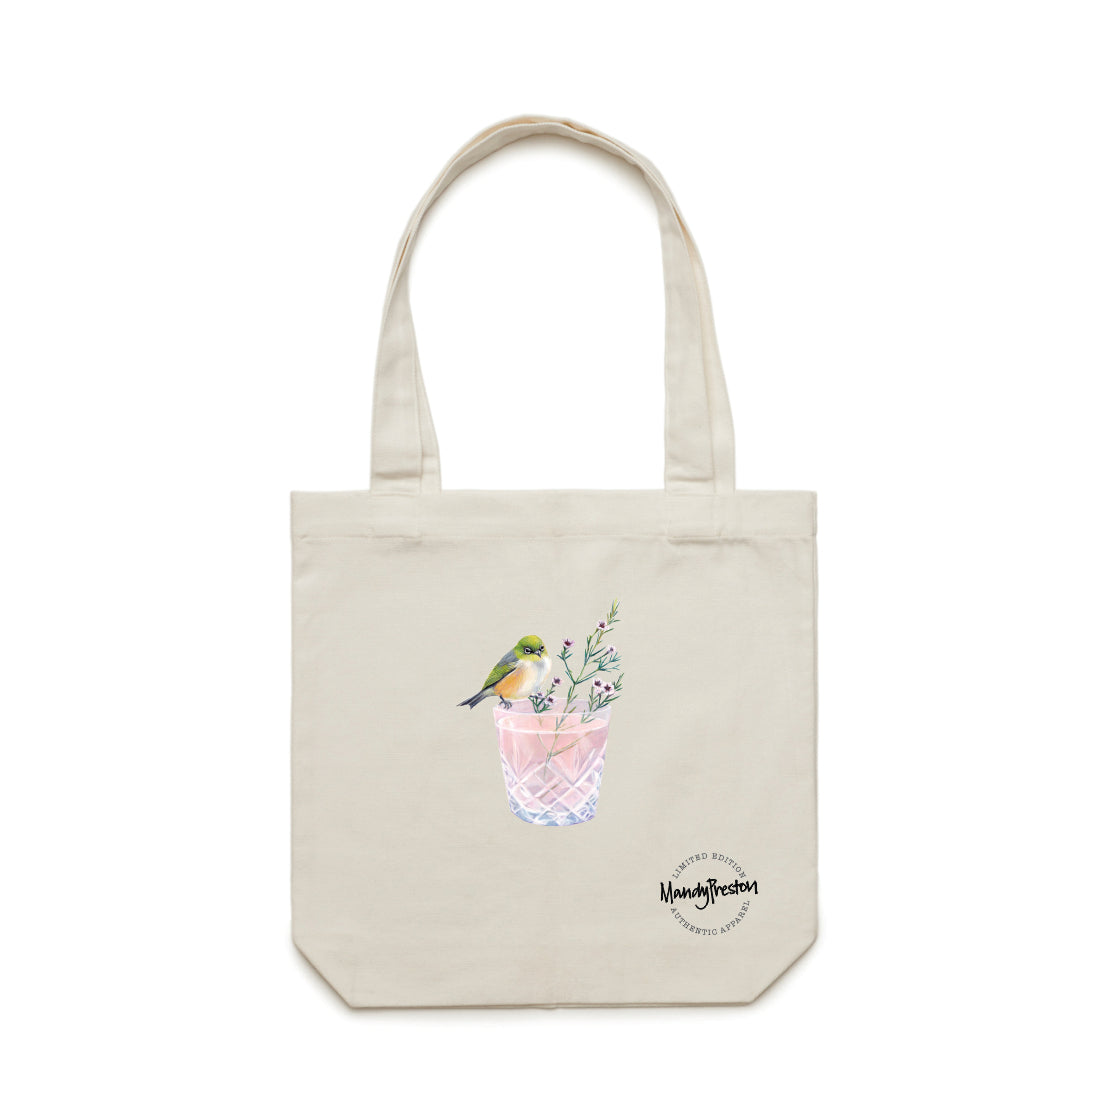 MANDY PRESTON LIMITED EDITION TOTES – ProBrands Clothing